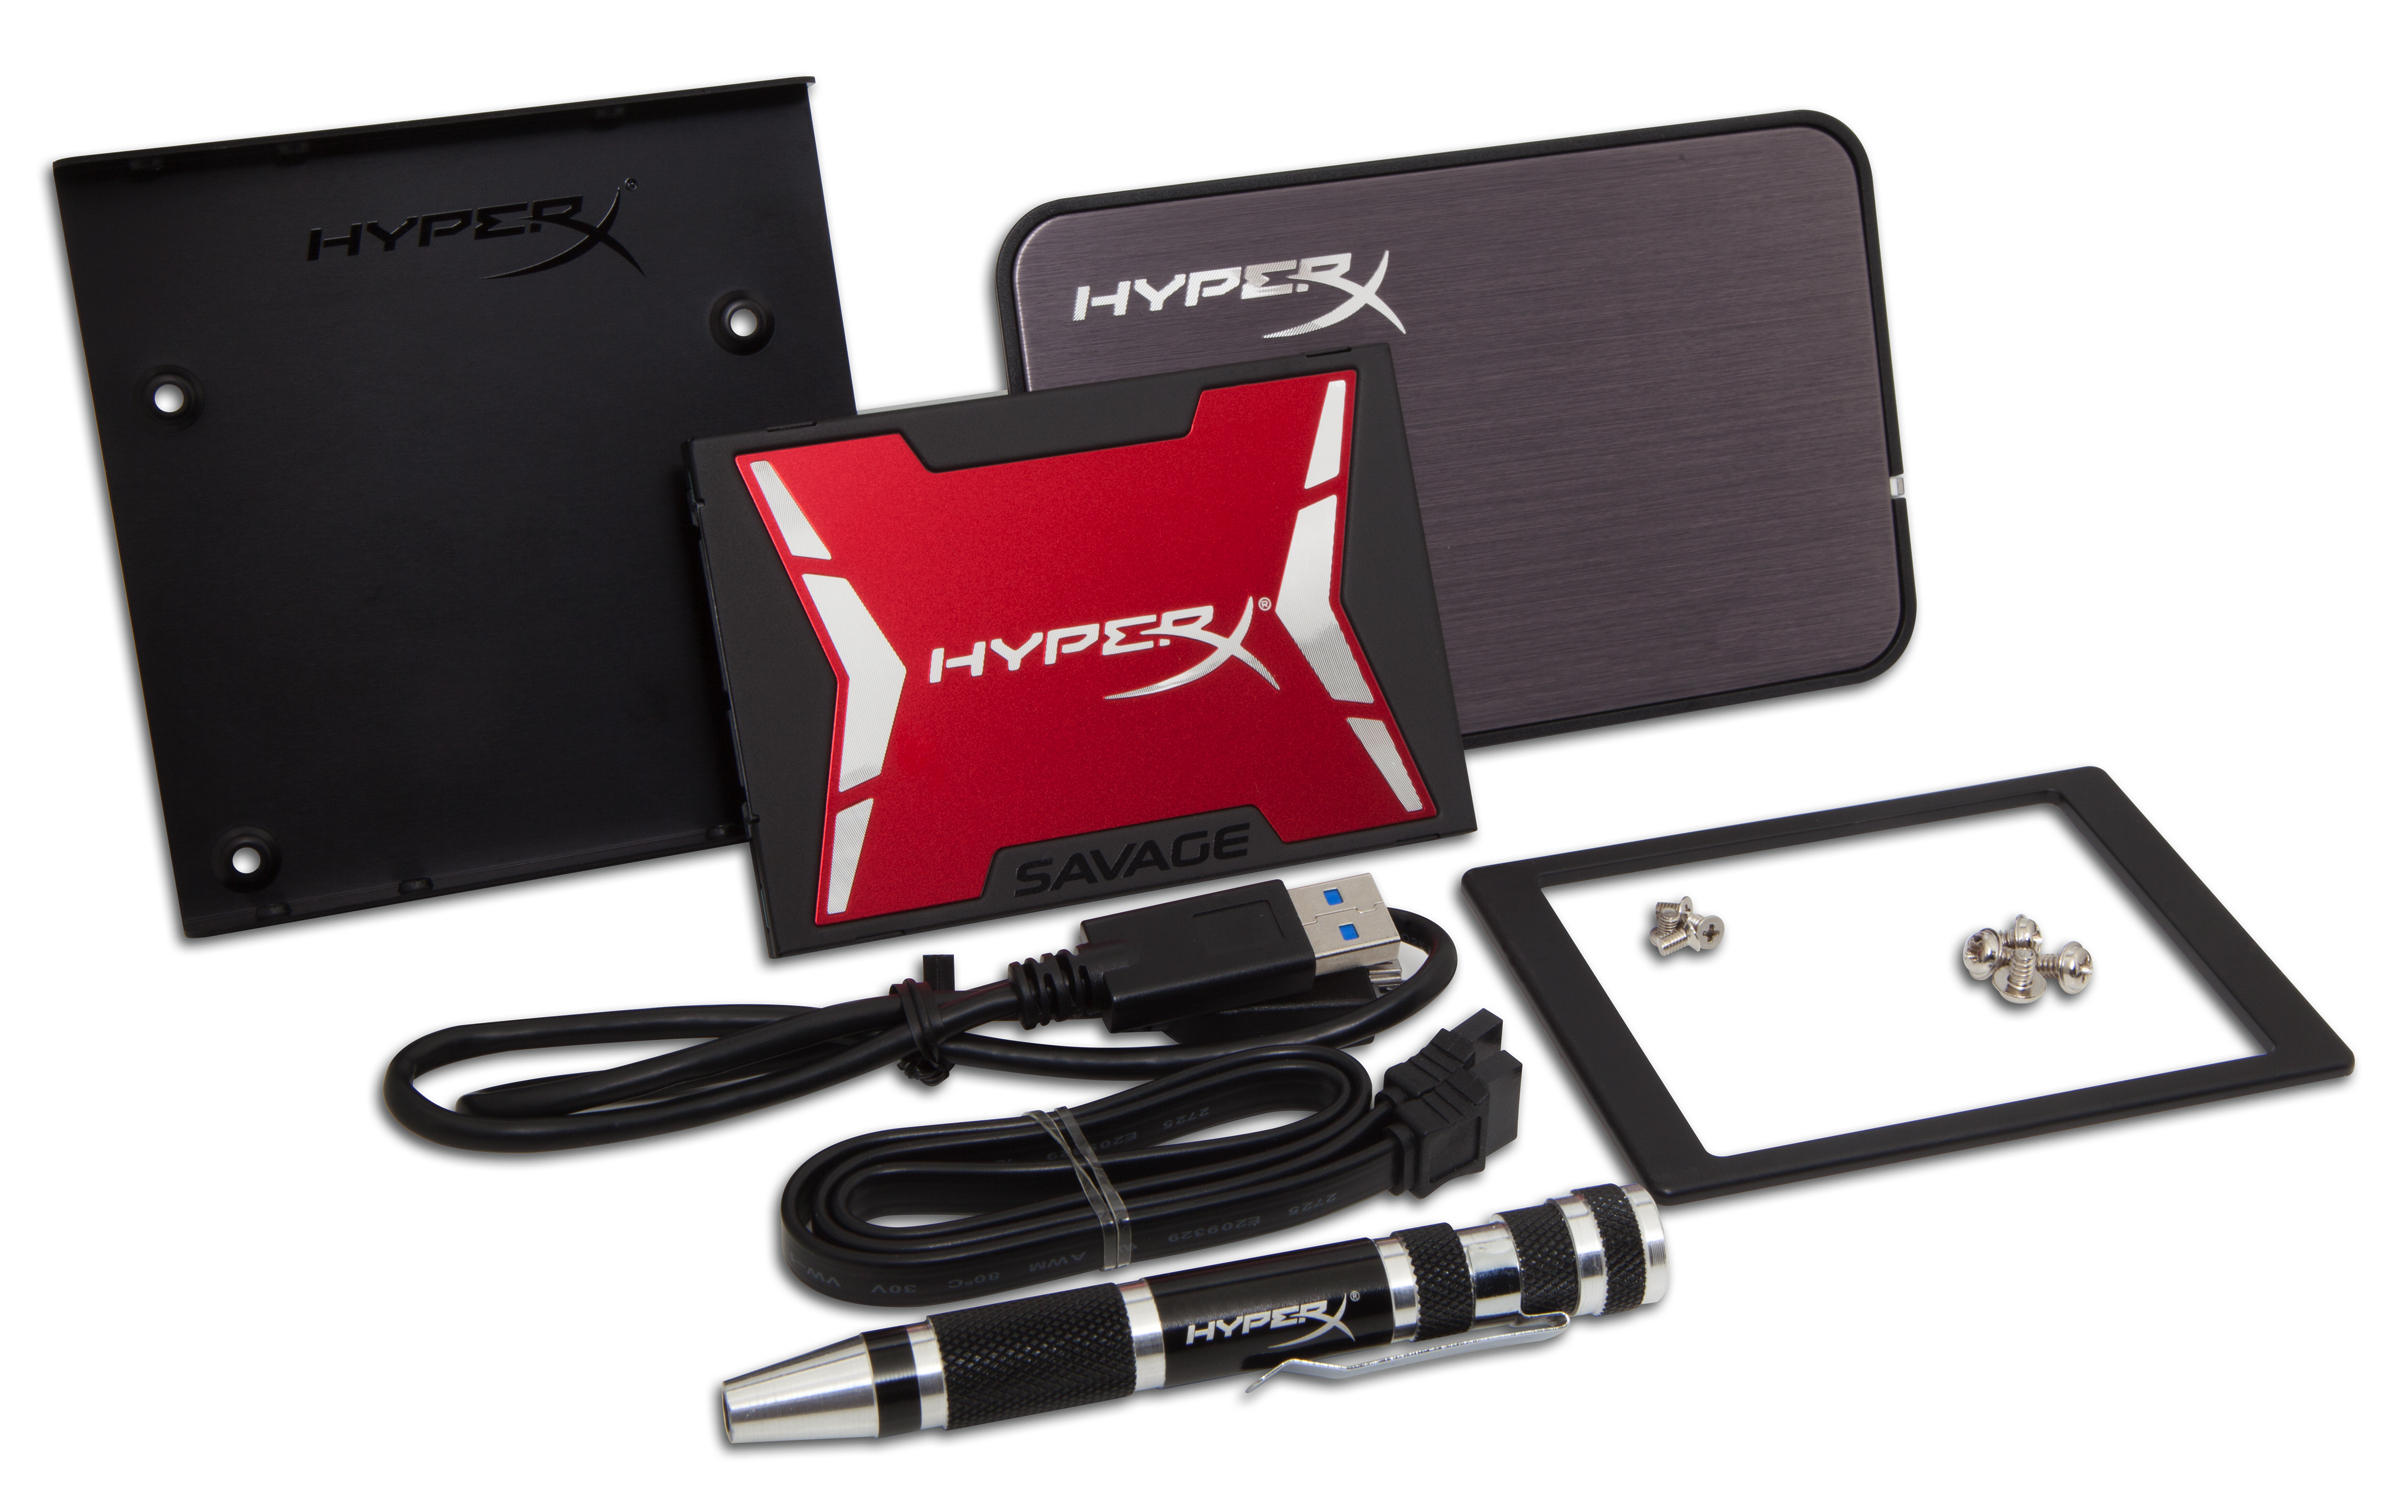 Kingston HyperX releases Savage -- a fast and stylish SATA SSD